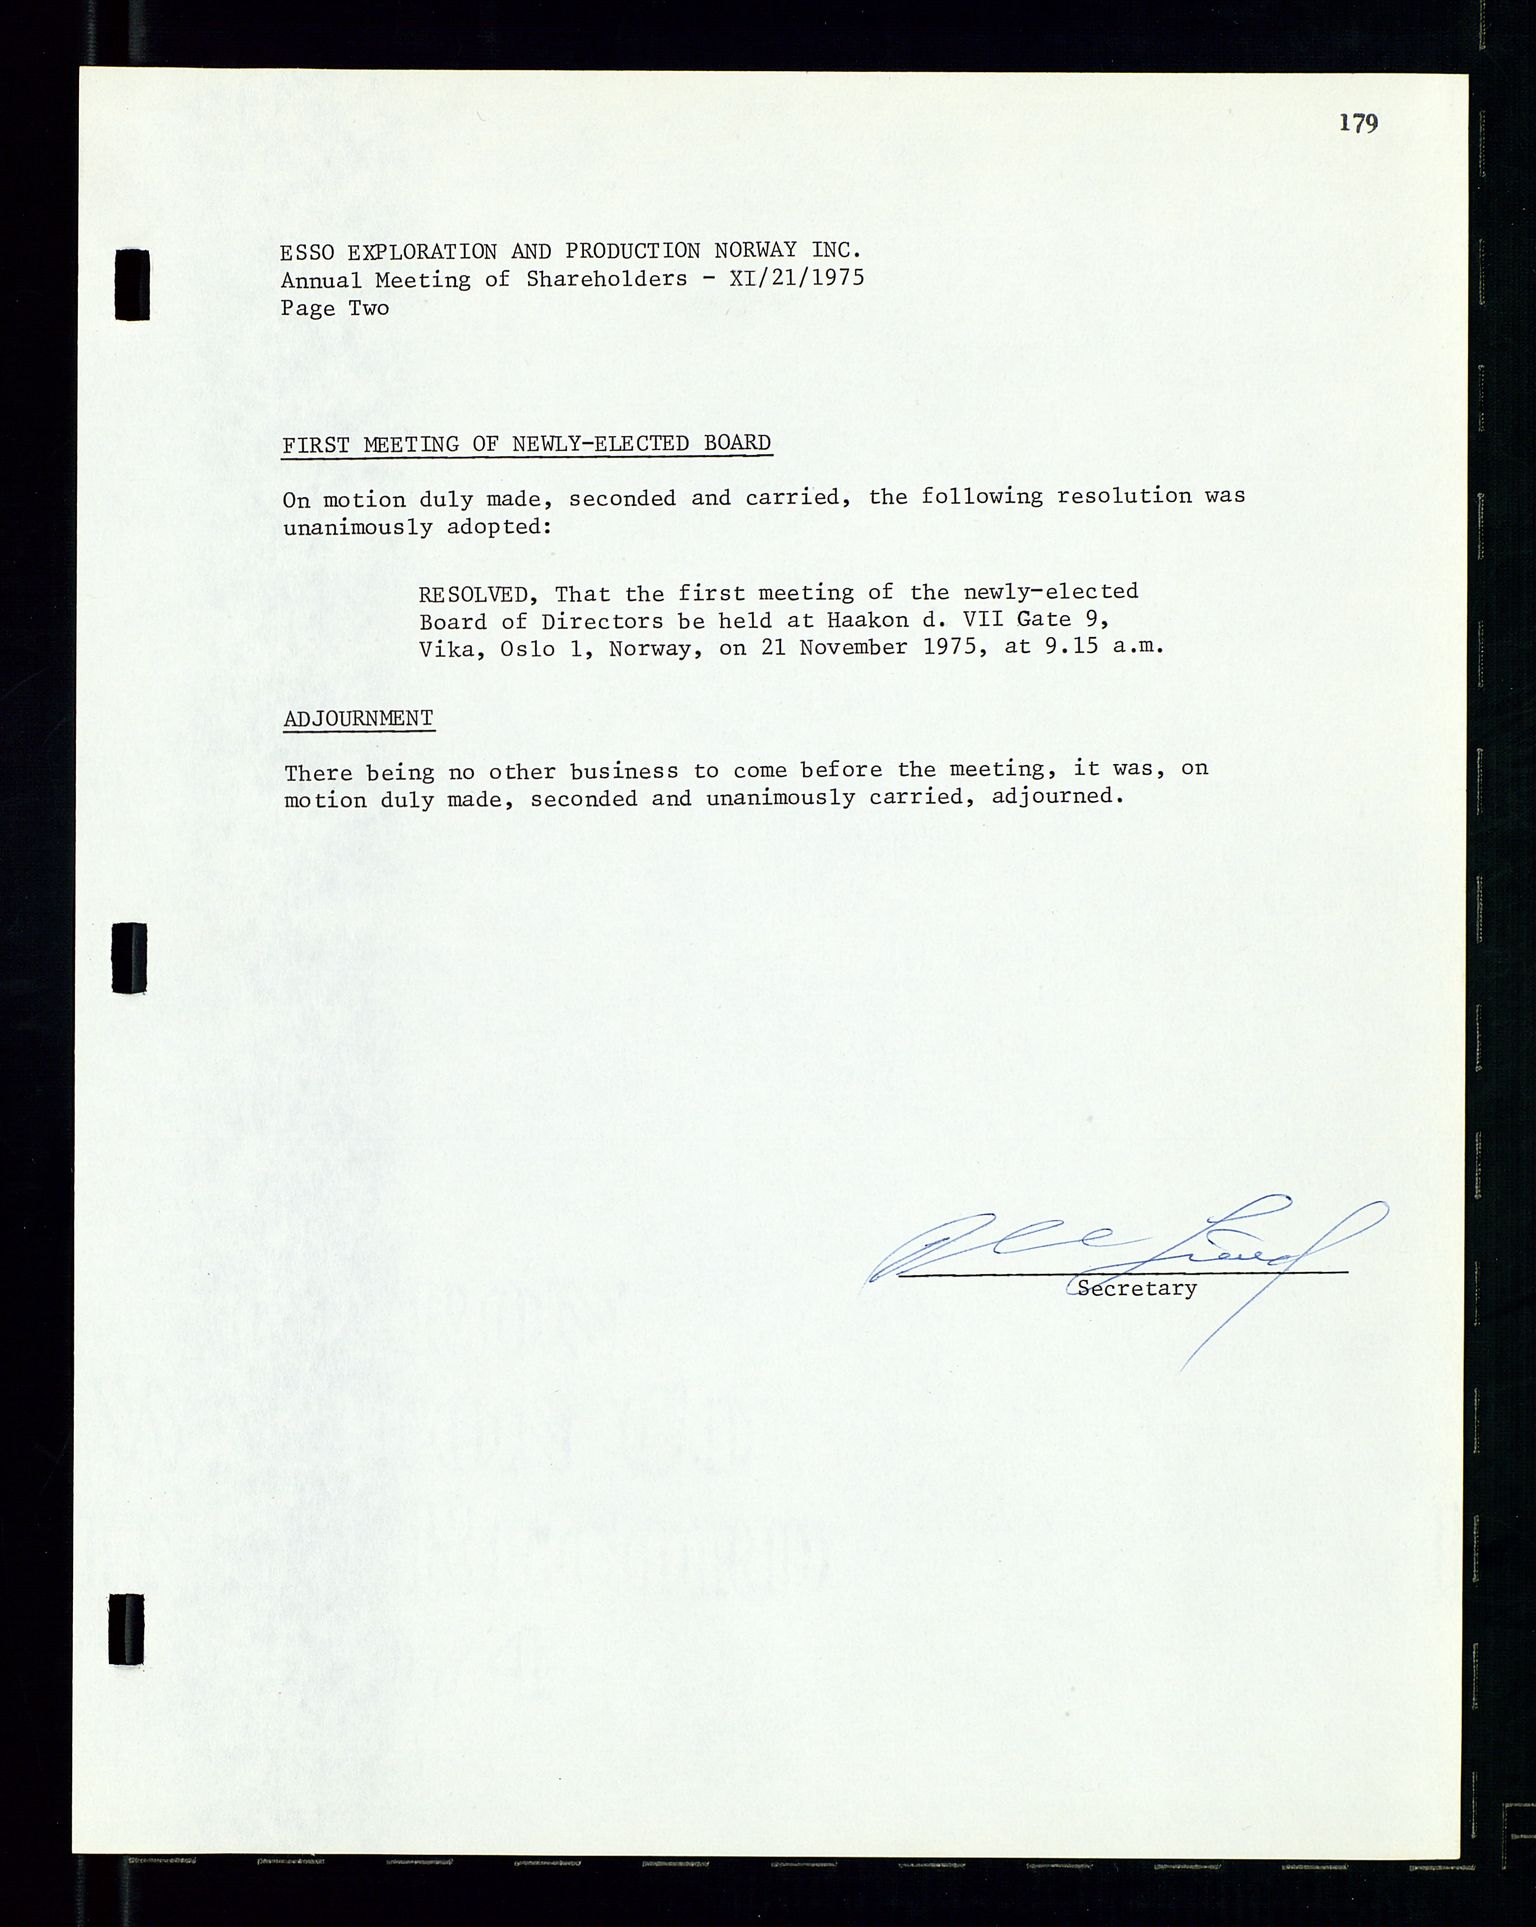 Pa 1512 - Esso Exploration and Production Norway Inc., SAST/A-101917/A/Aa/L0001/0002: Styredokumenter / Corporate records, Board meeting minutes, Agreements, Stocholder meetings, 1975-1979, p. 10